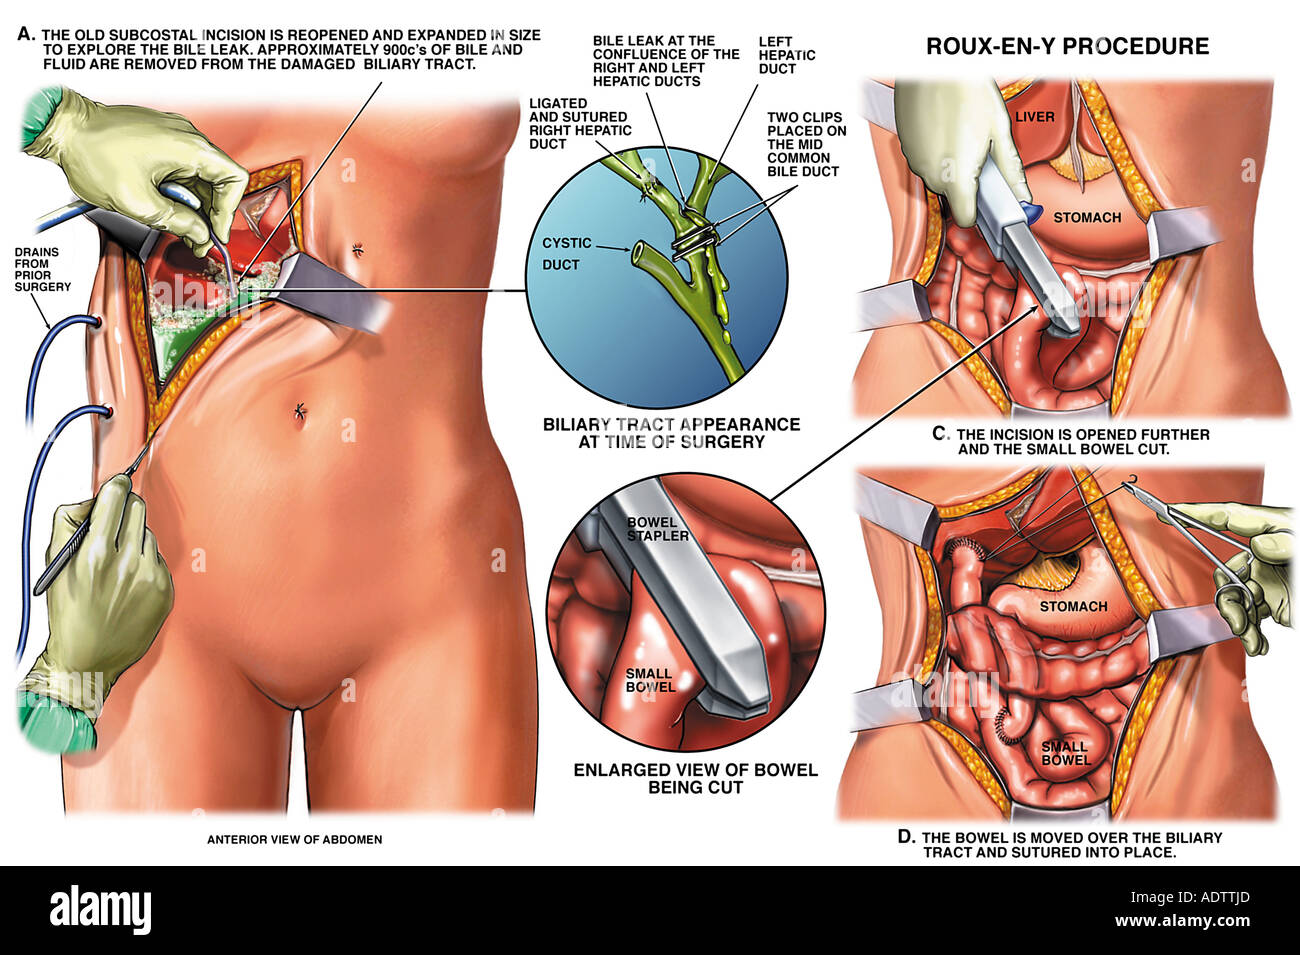 Roux-en-Y Gastric Bypass Surgery to Correct Biliary Tract Injury Stock Photo